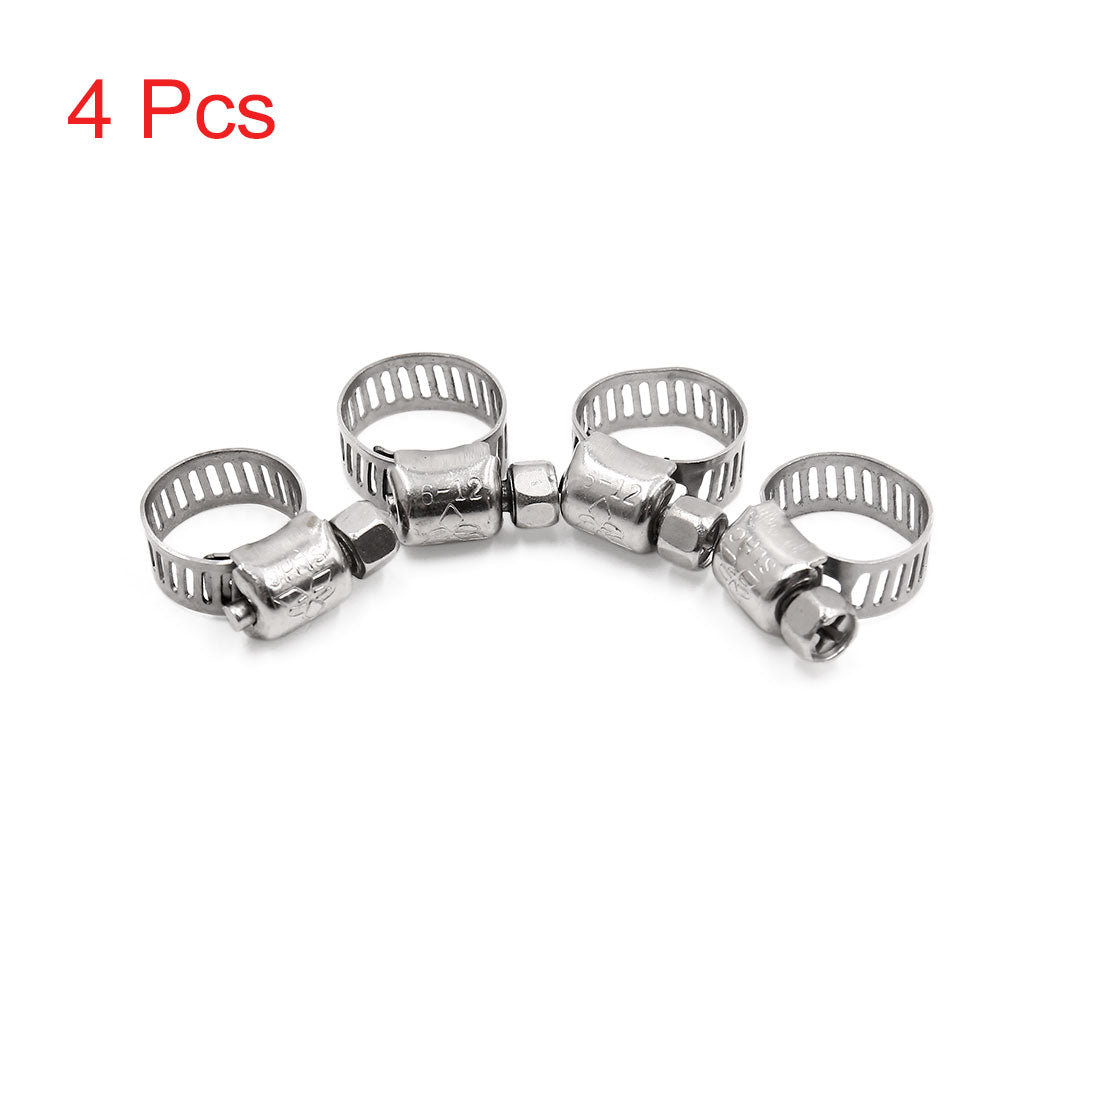 uxcell Uxcell 4pcs Silver Tone Stainless Steel 6-12mm Adjustable  Gear Car Hose Clamp